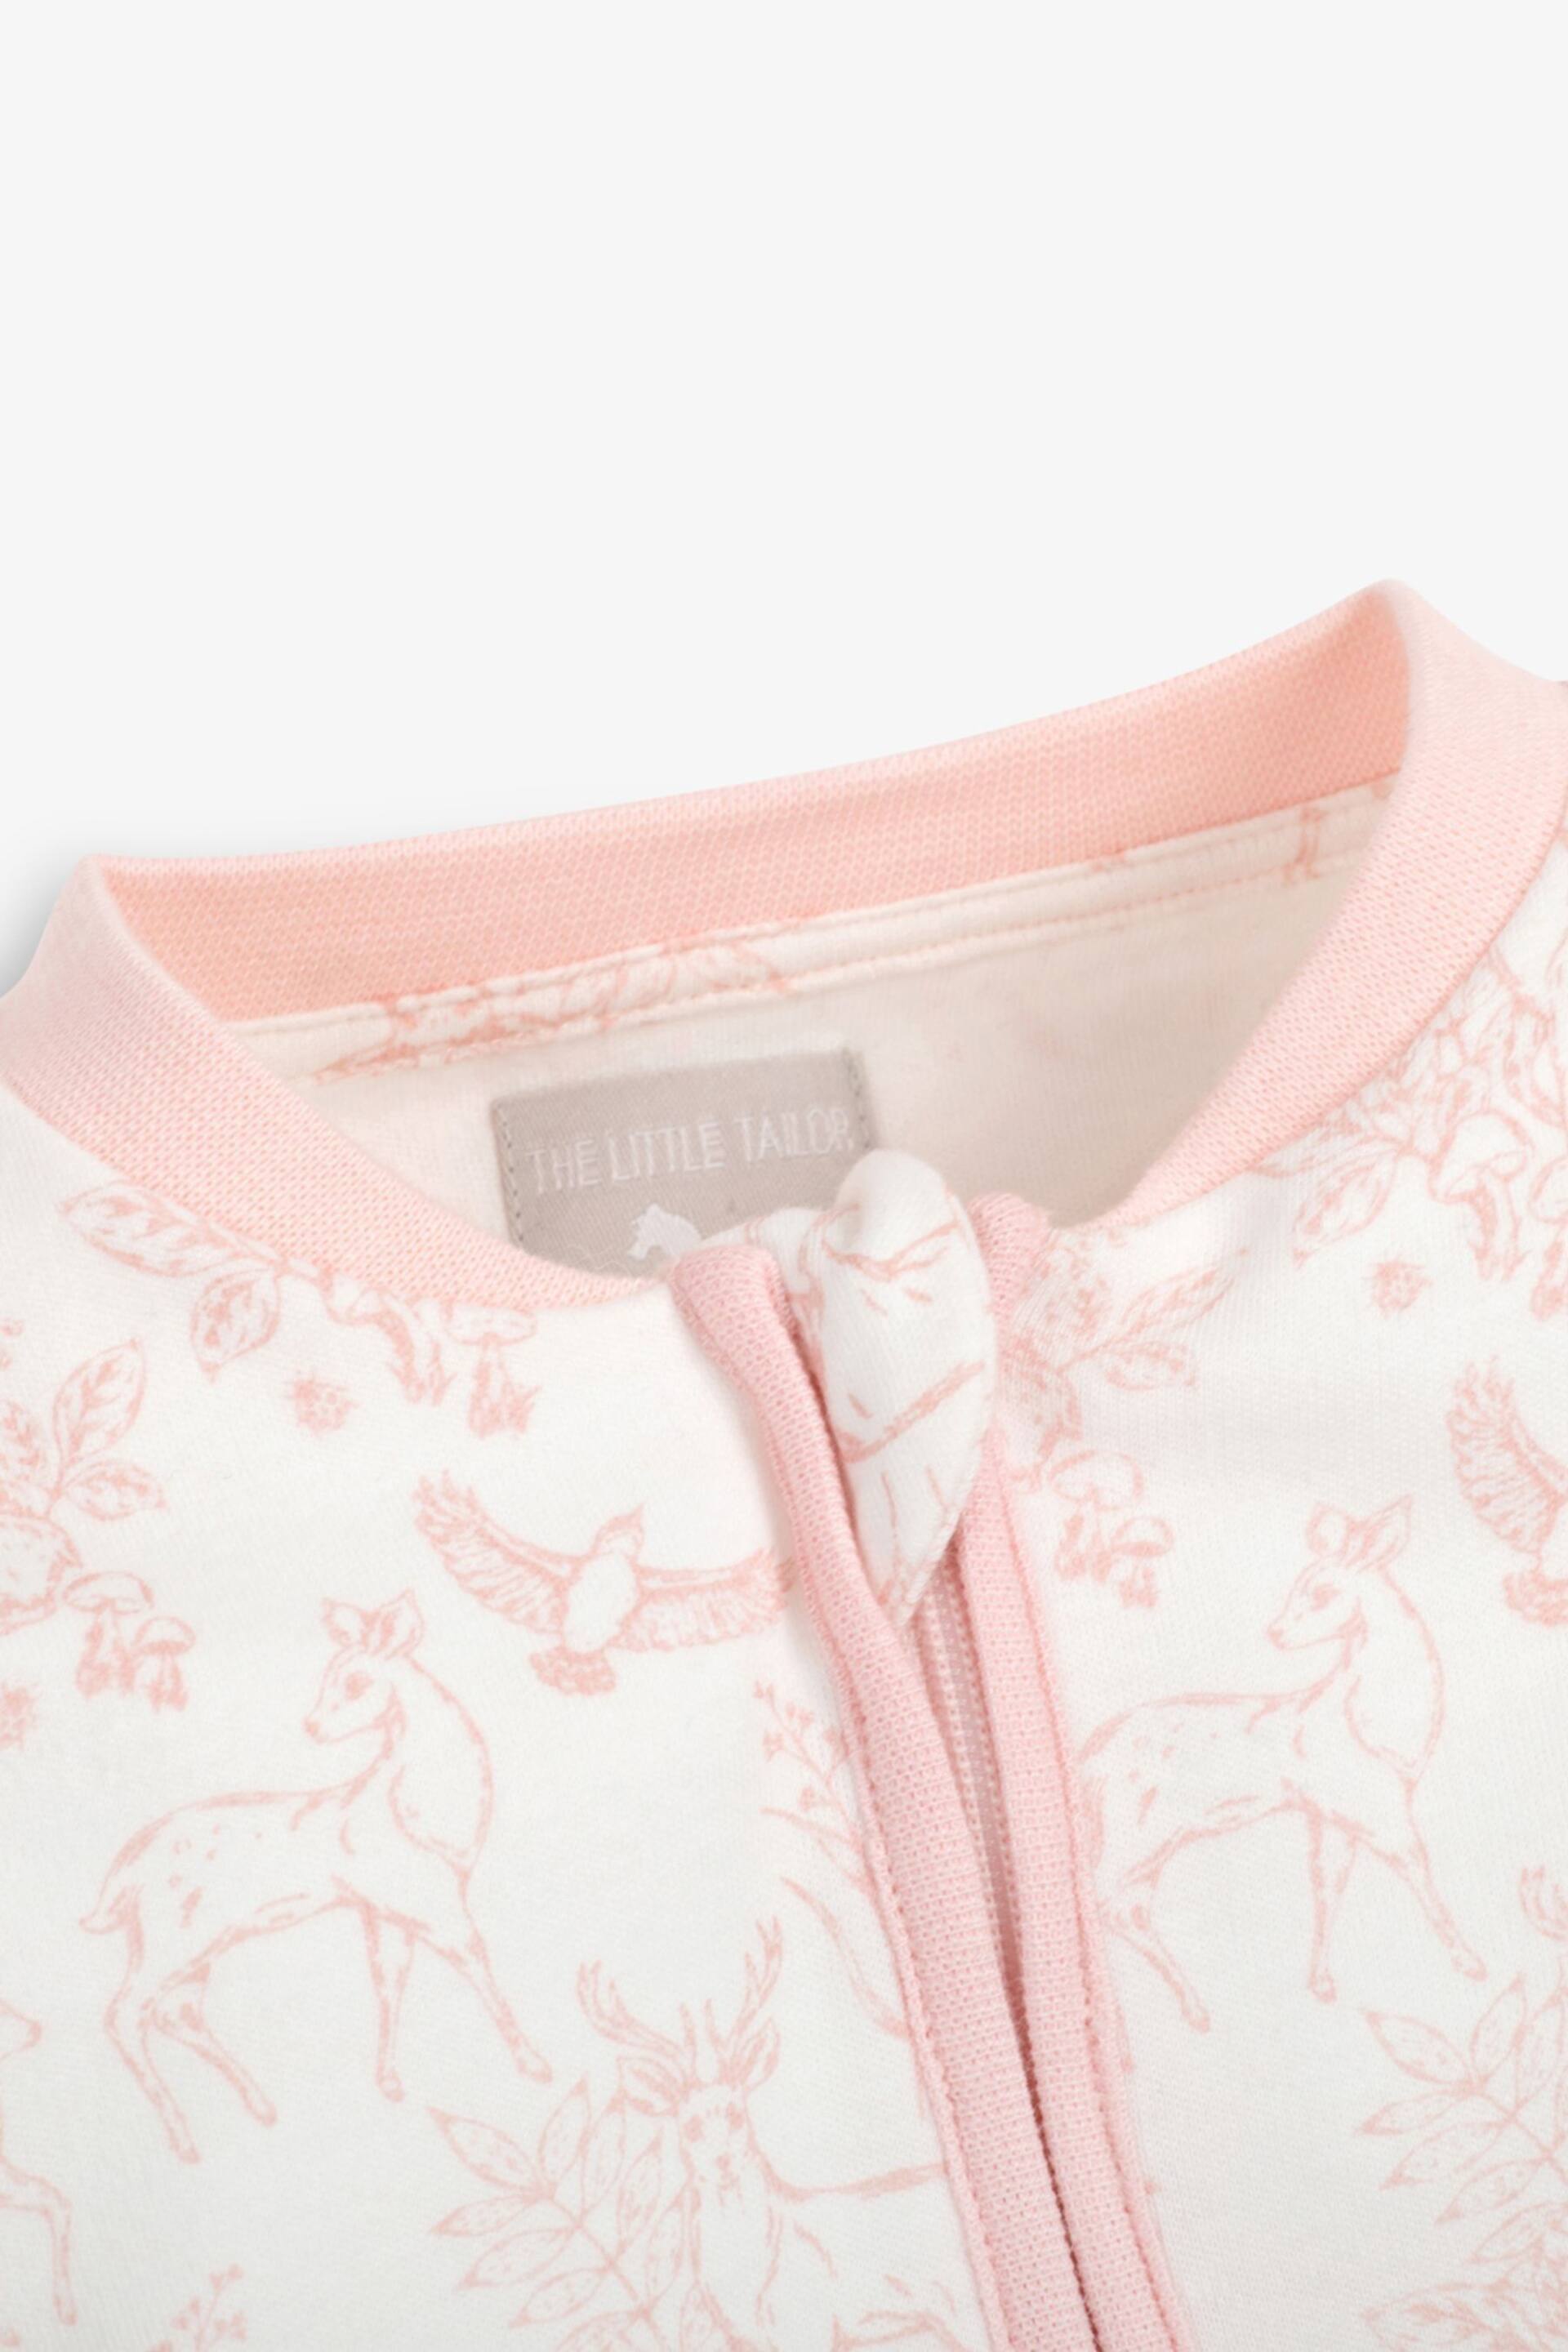 The Little Tailor Baby Sleepsuit And Toy Bunny 2 Piece Gift Set - Image 4 of 7